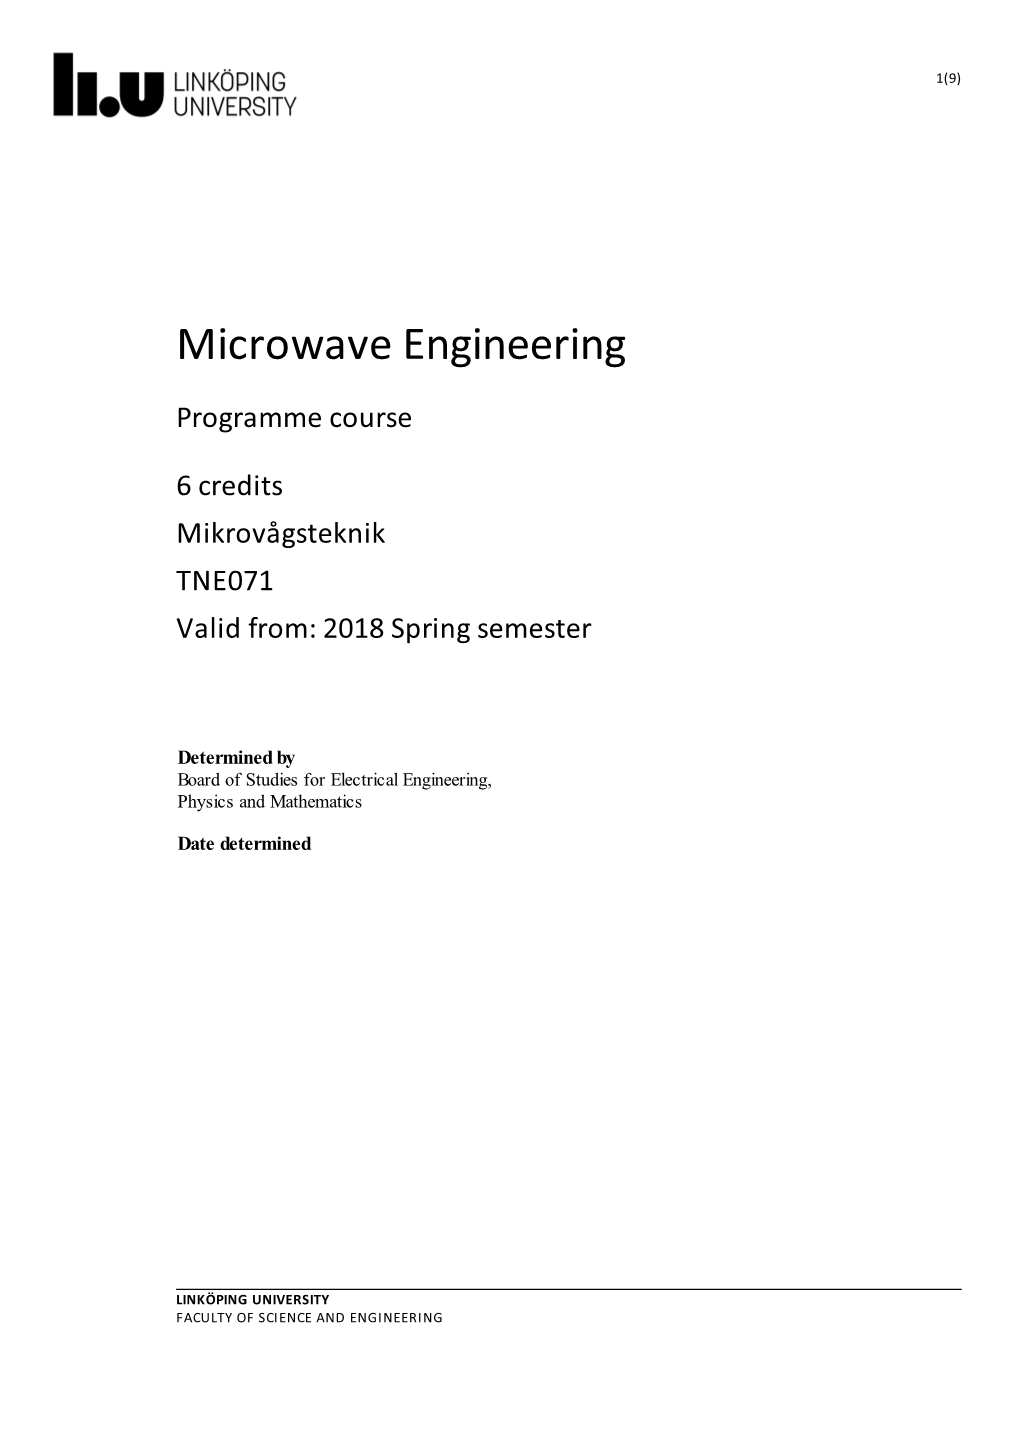 Microwave Engineering Programme Course 6 Credits Mikrovågsteknik TNE071 Valid From: 2018 Spring Semester